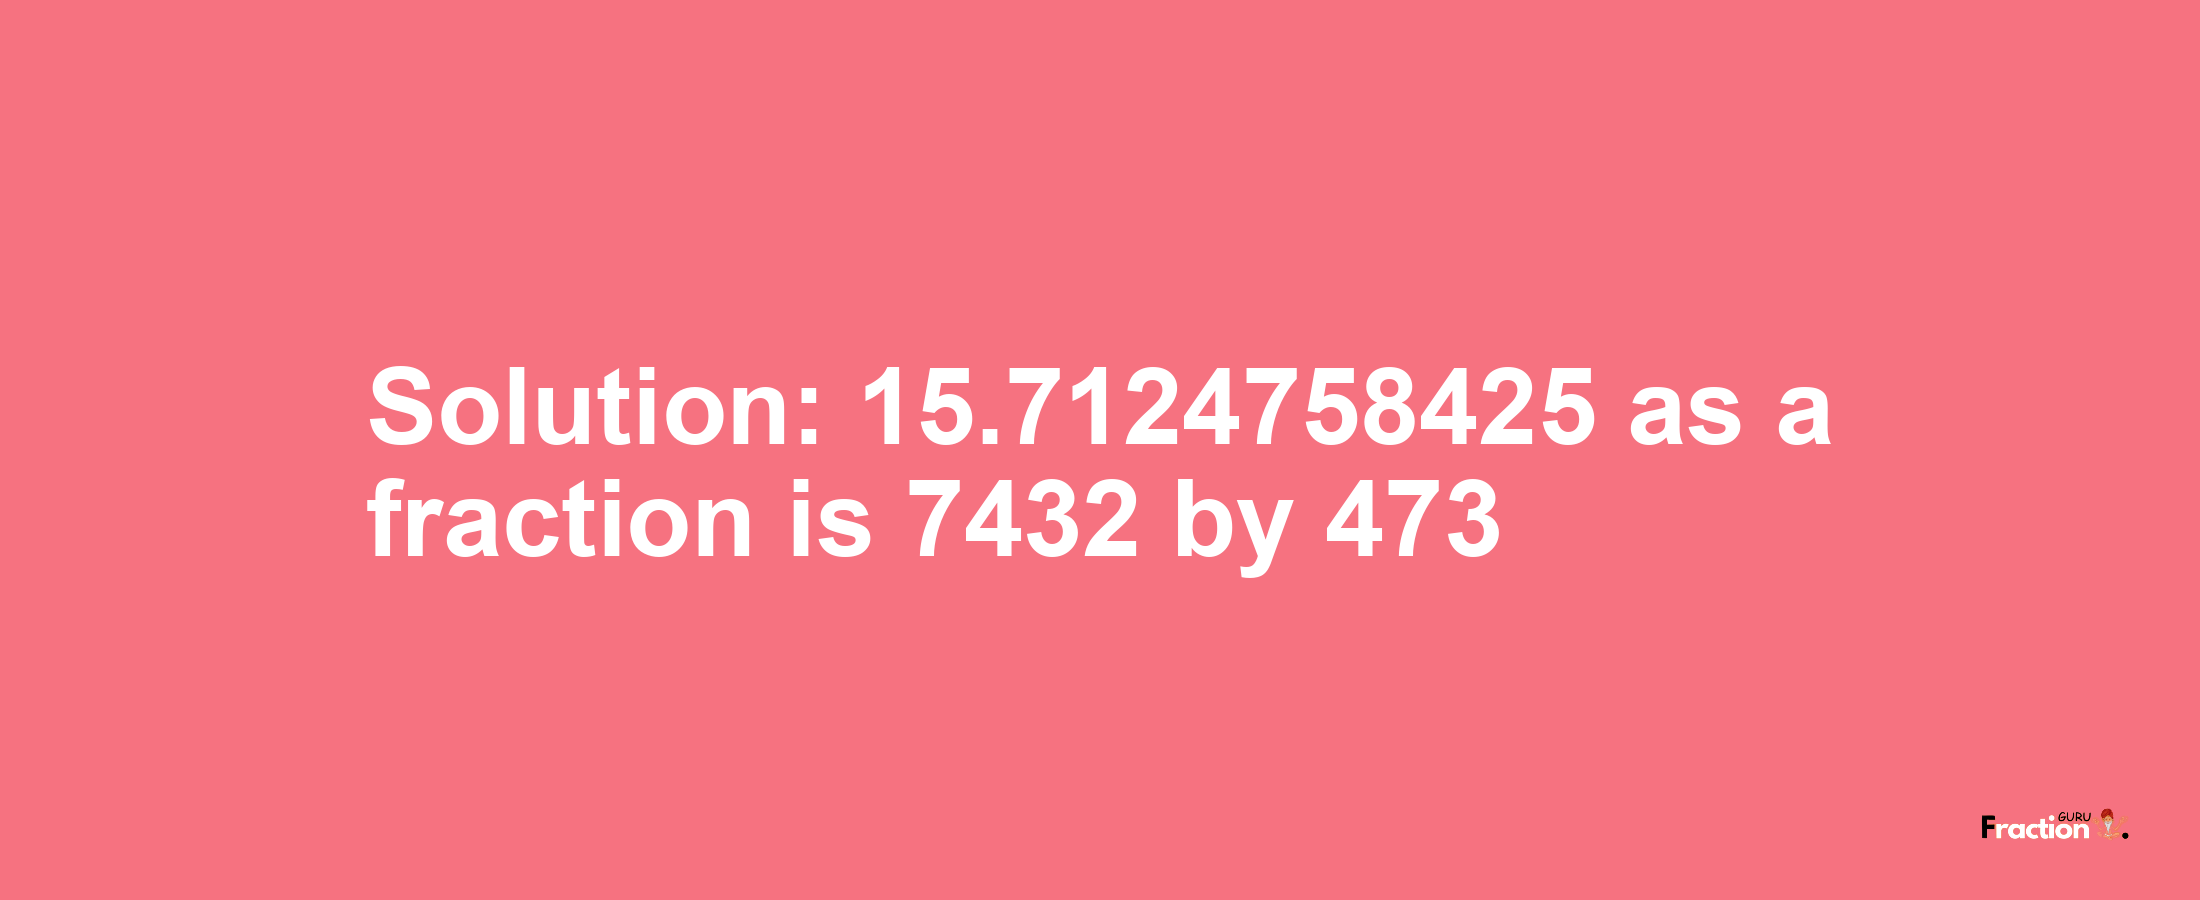 Solution:15.7124758425 as a fraction is 7432/473